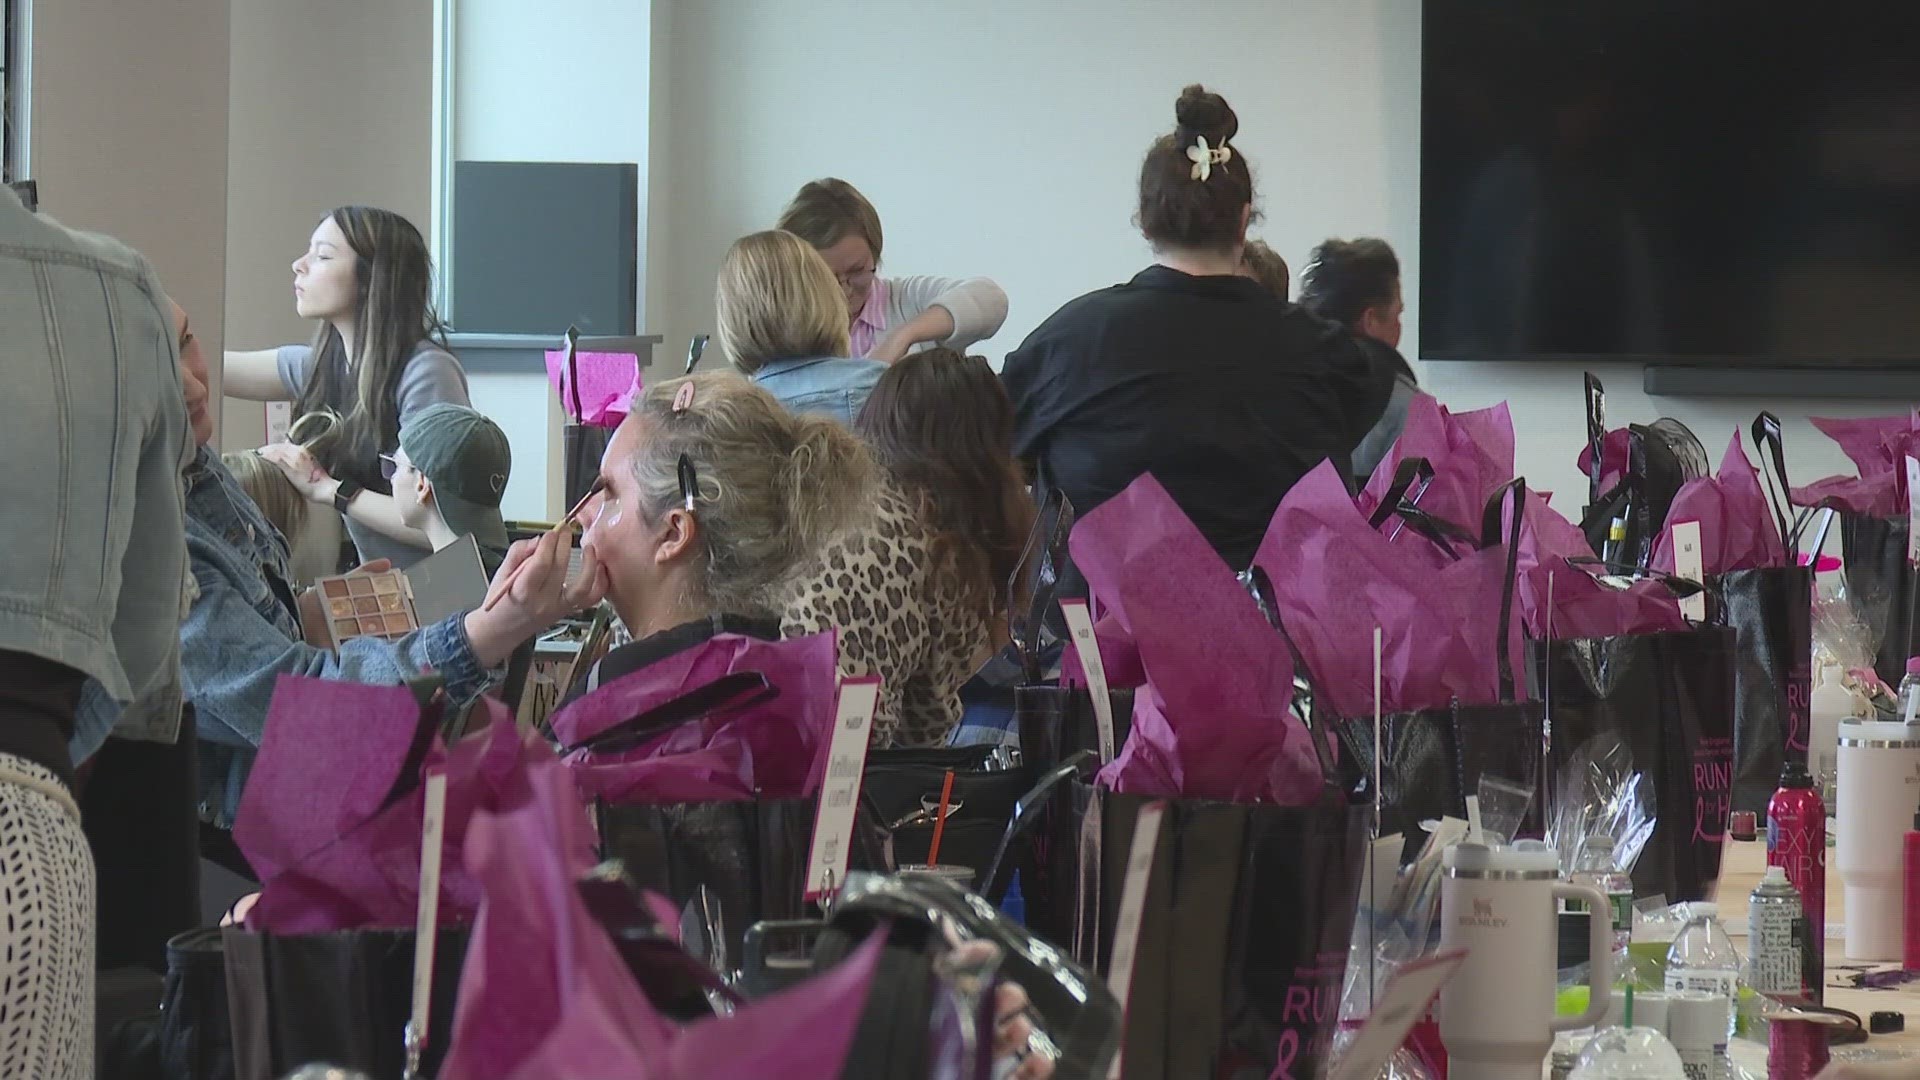 Hundreds of women were getting ready to hit the runway Saturday in Portland for the second annual Runway for Hope event.